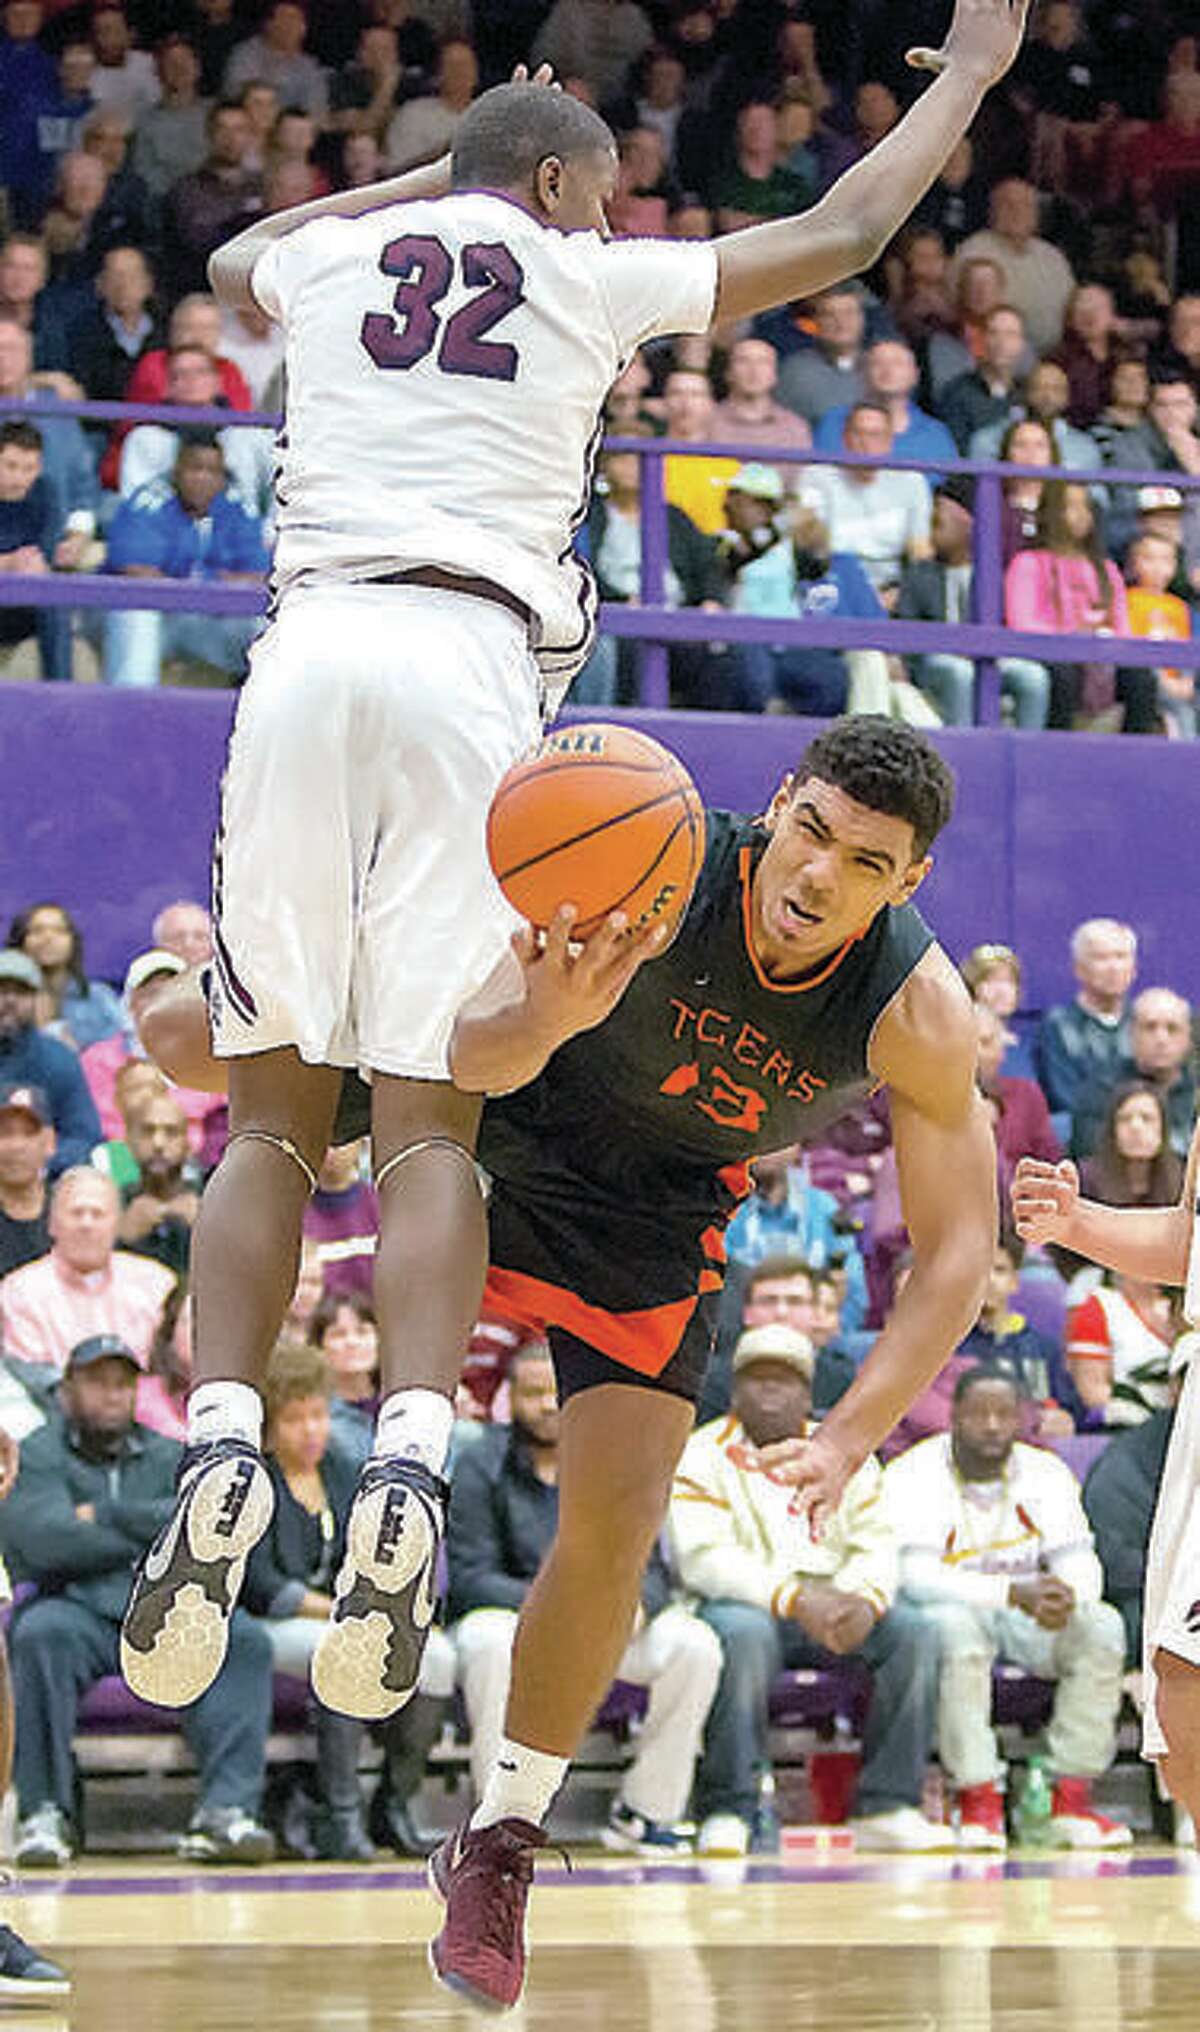 Former Edwardsville Tiger Mark Smith (13) is fouled by Belleville West forward EJ Liddell (32) during the 2017 playoffs in Collinsville. The pair, two of the state’s top prep stars of recent seasons opted for out-of-state schools, Liddell, a senior at West, chose Ohio State in October and Smith is at Missouri, after transferring following his freshman season at Illinois.